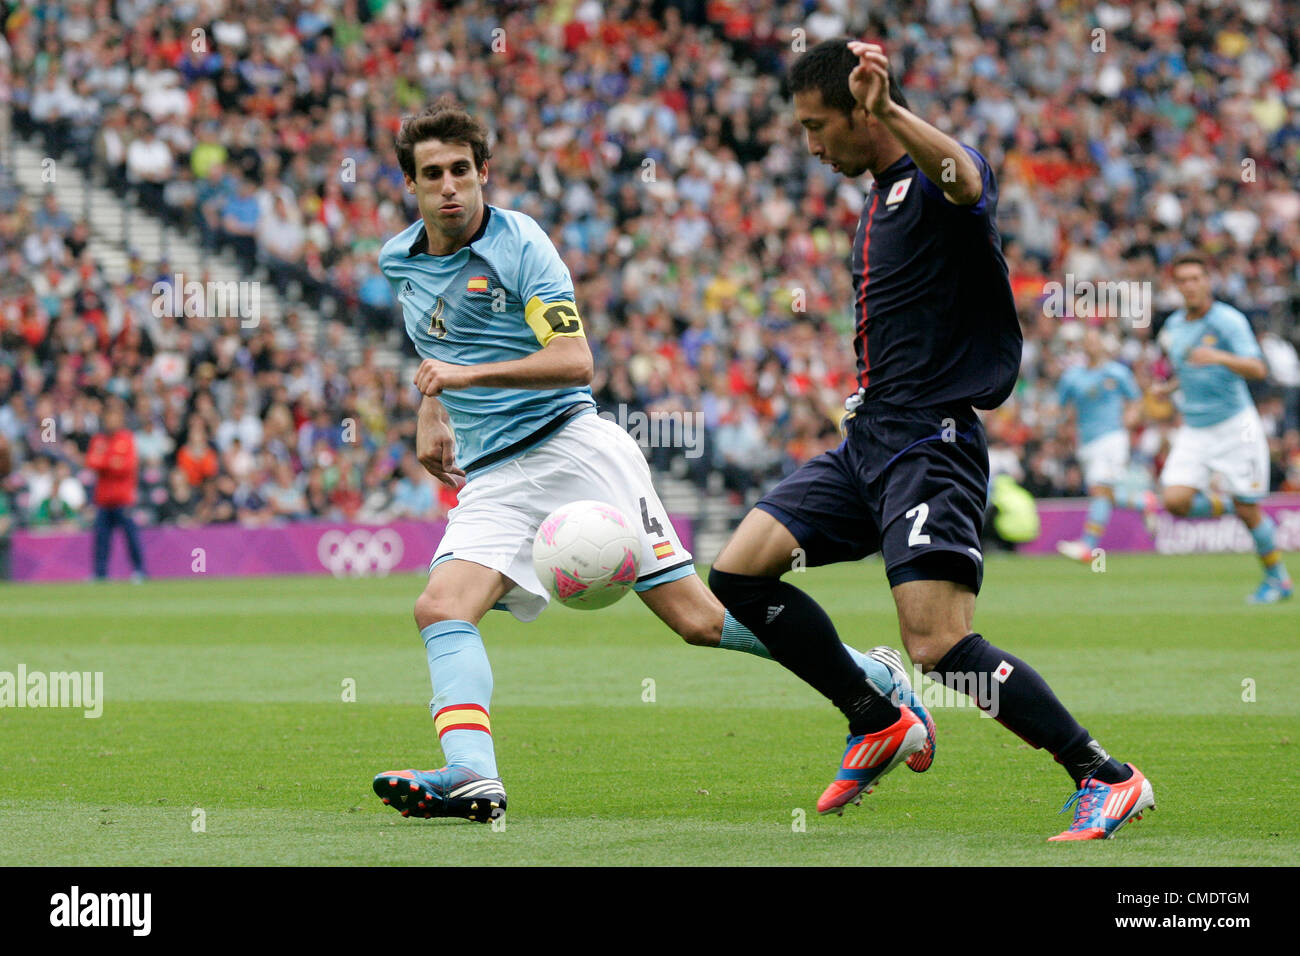 26.07.2012 Glasgow, Scotland. 4 Javi Martínez and 2 Yuhei Tokunaga in action during the Olympic Football Men's Preliminary game between Spain and Japan from Hampden Park. Japan pulled off a shock win over Spain by a score of 1-0. Stock Photo